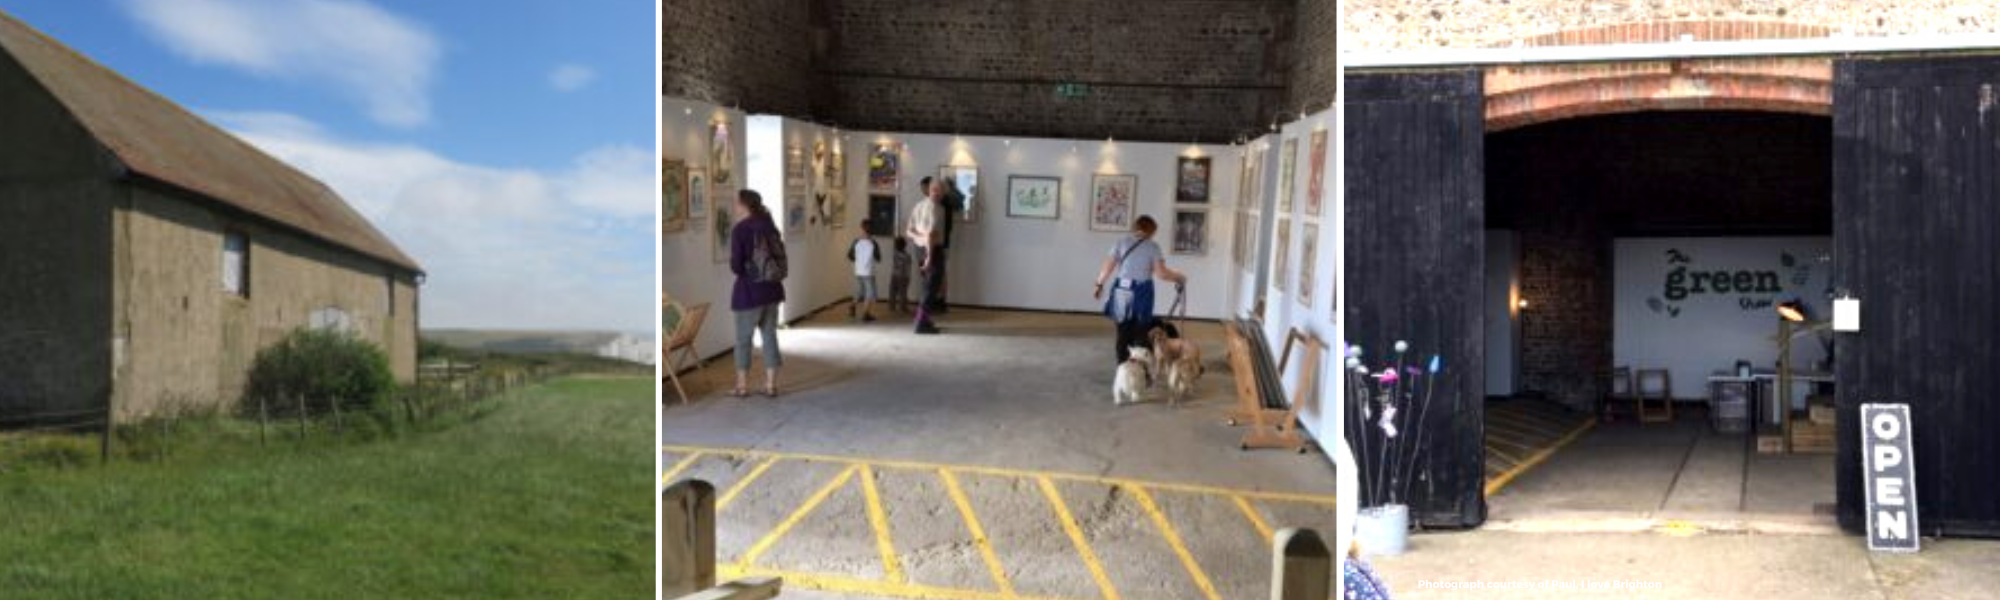 External view of South Hill Barn, and an art gallery inside the barn, people looking at artwork on the walls.